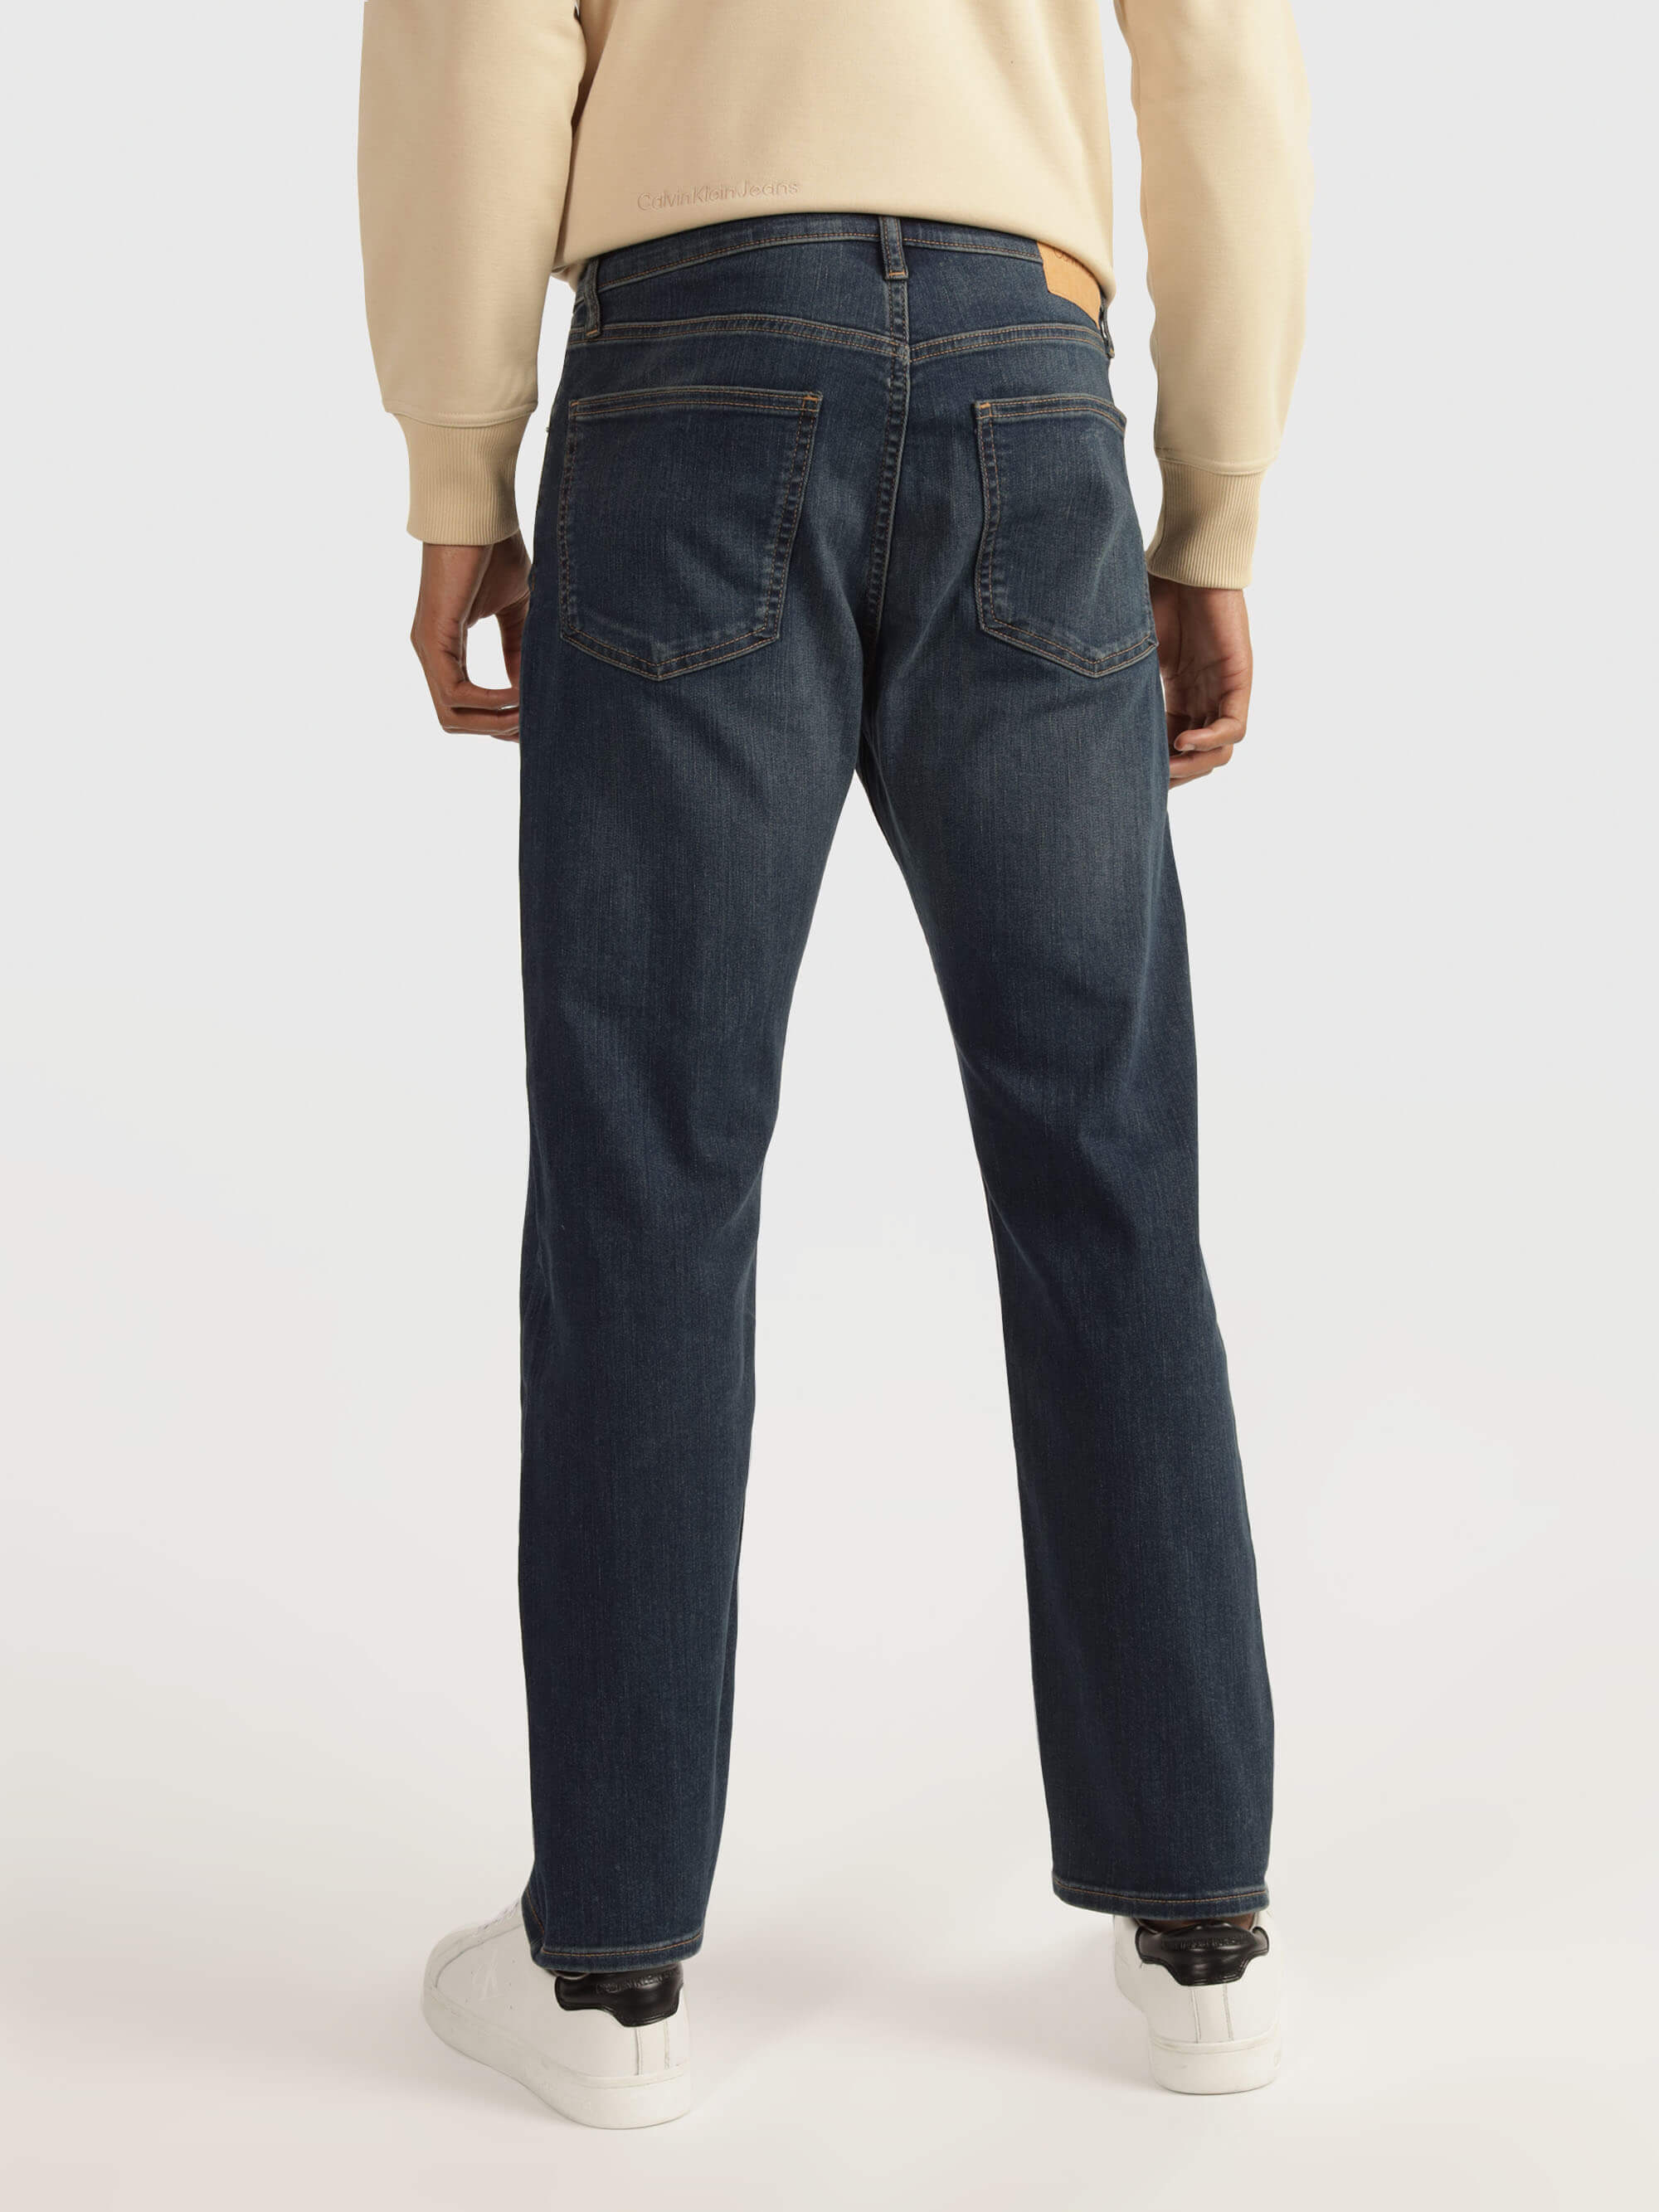 Jeans Calvin Klein Slim Washed Hombre Azul